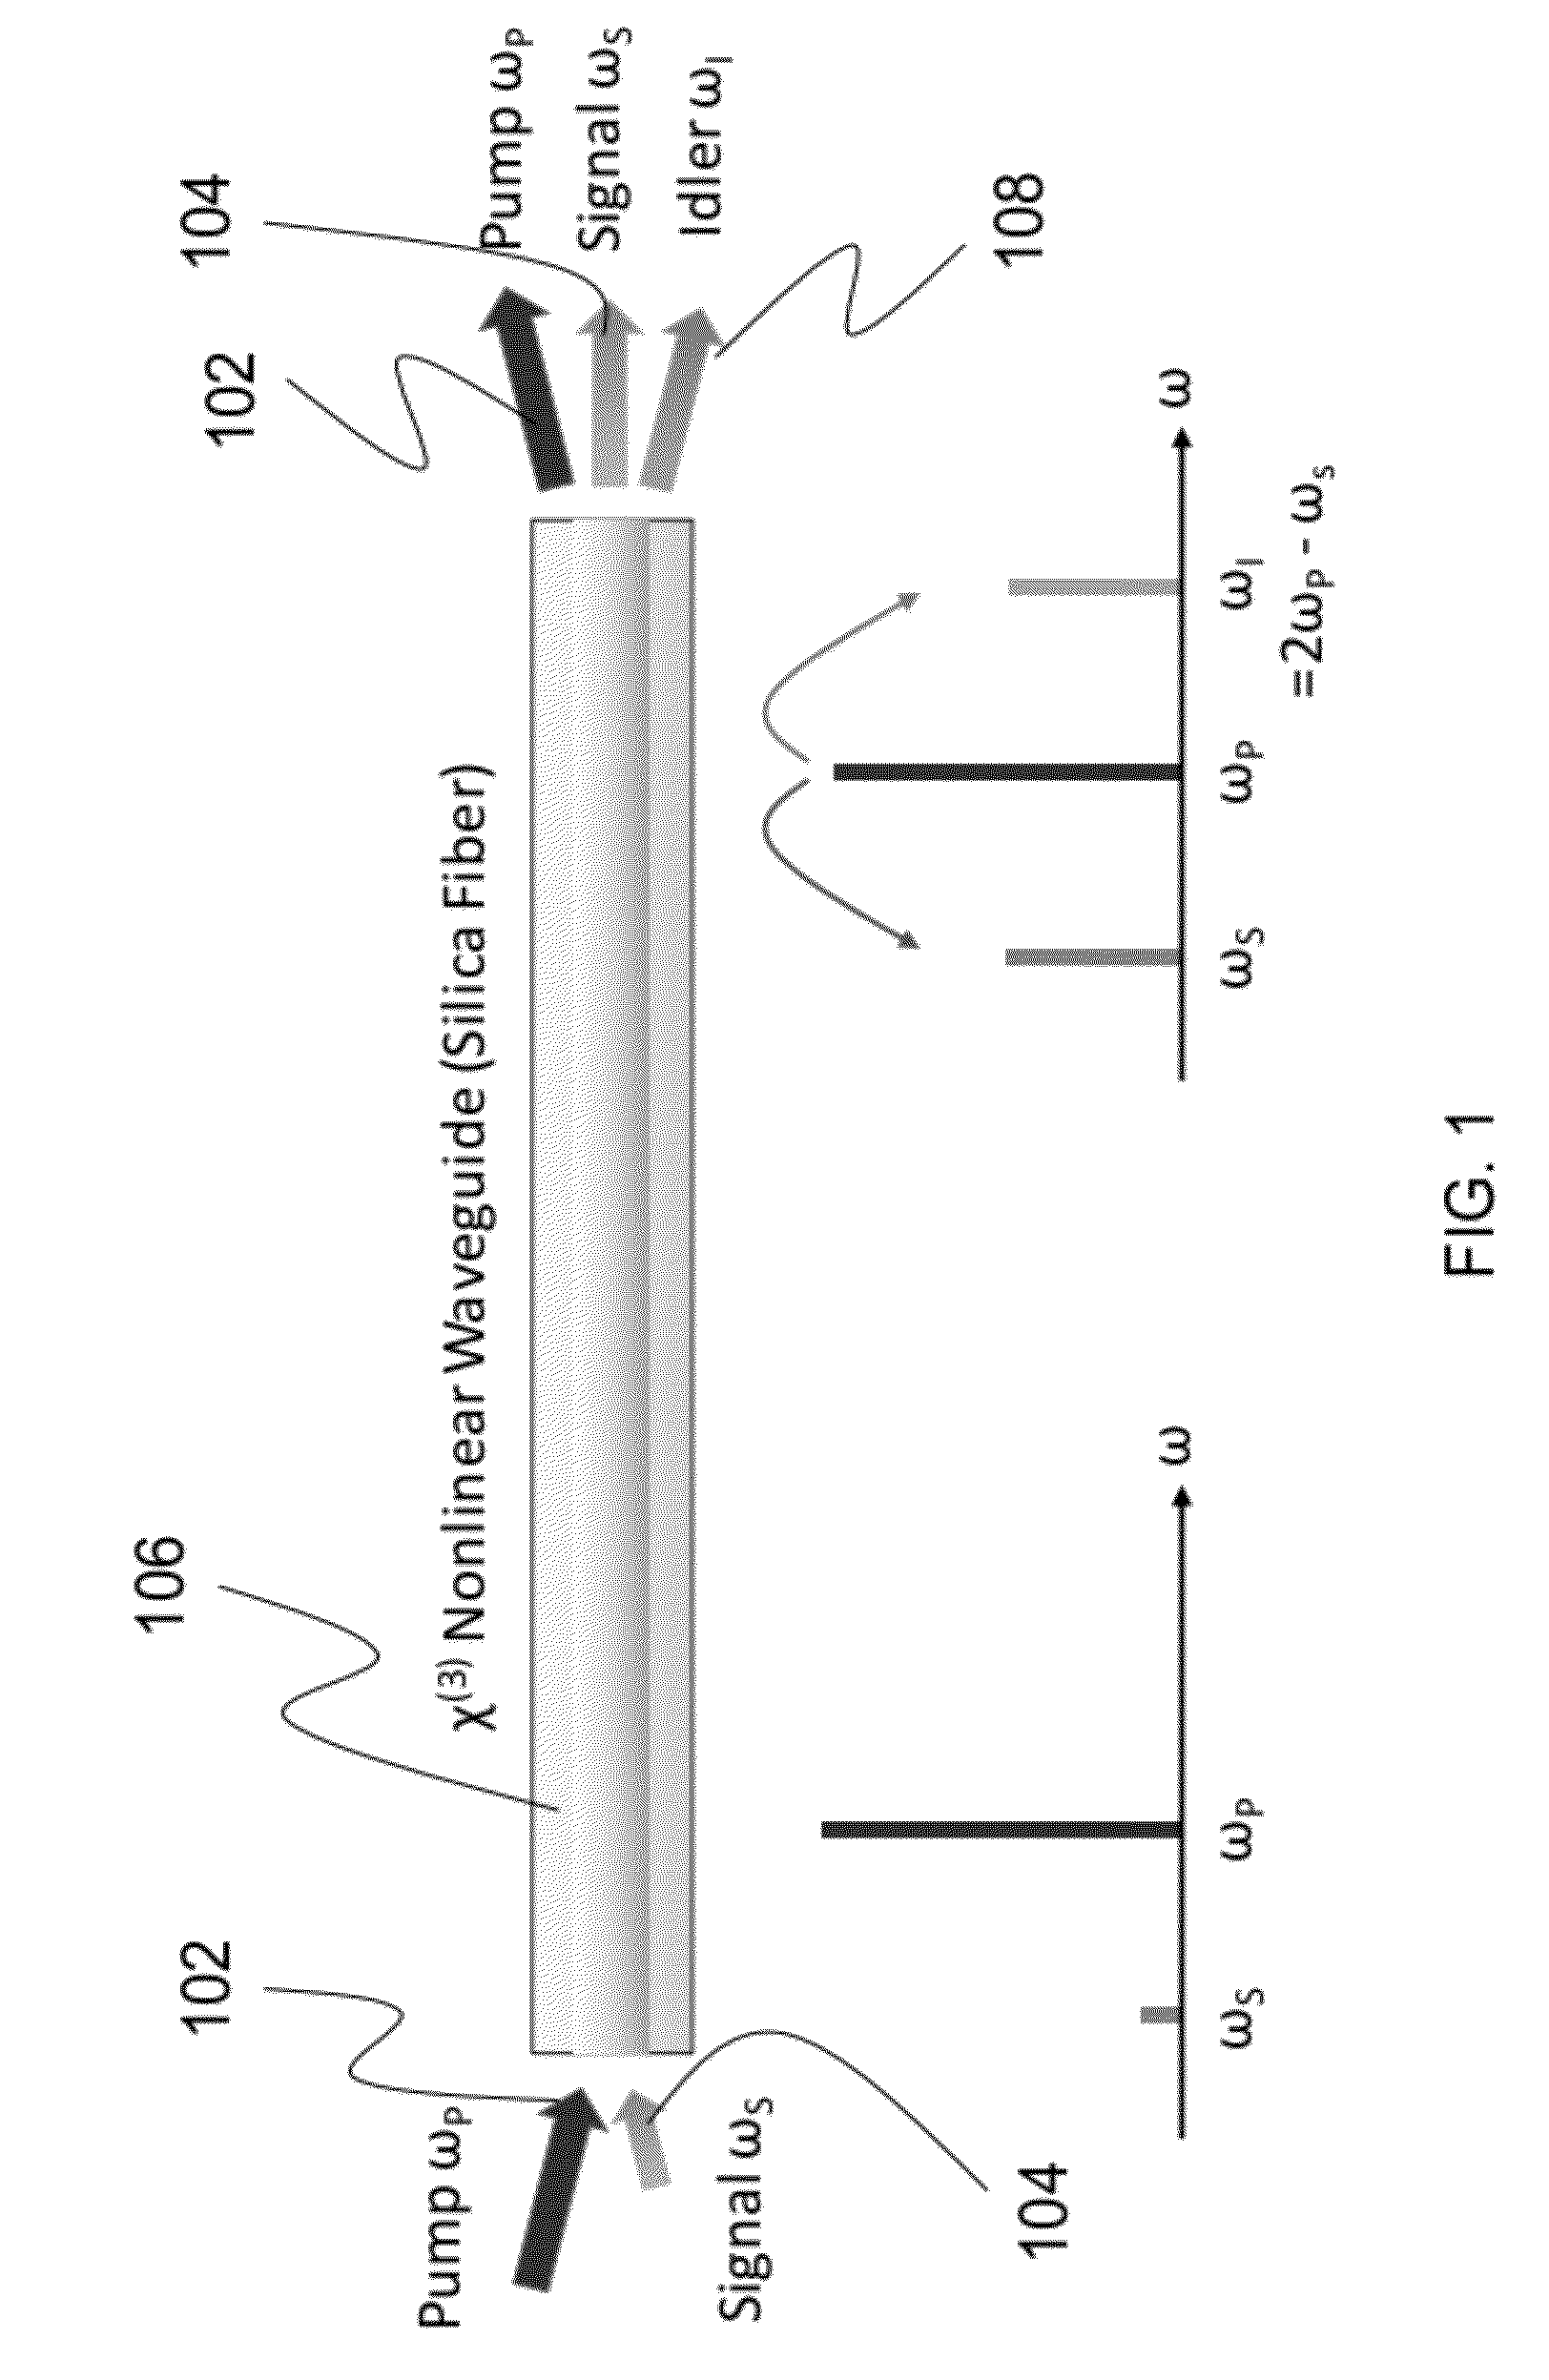 Systems and methods for fiber optic parametric amplification and nonlinear optical fiber for use therein